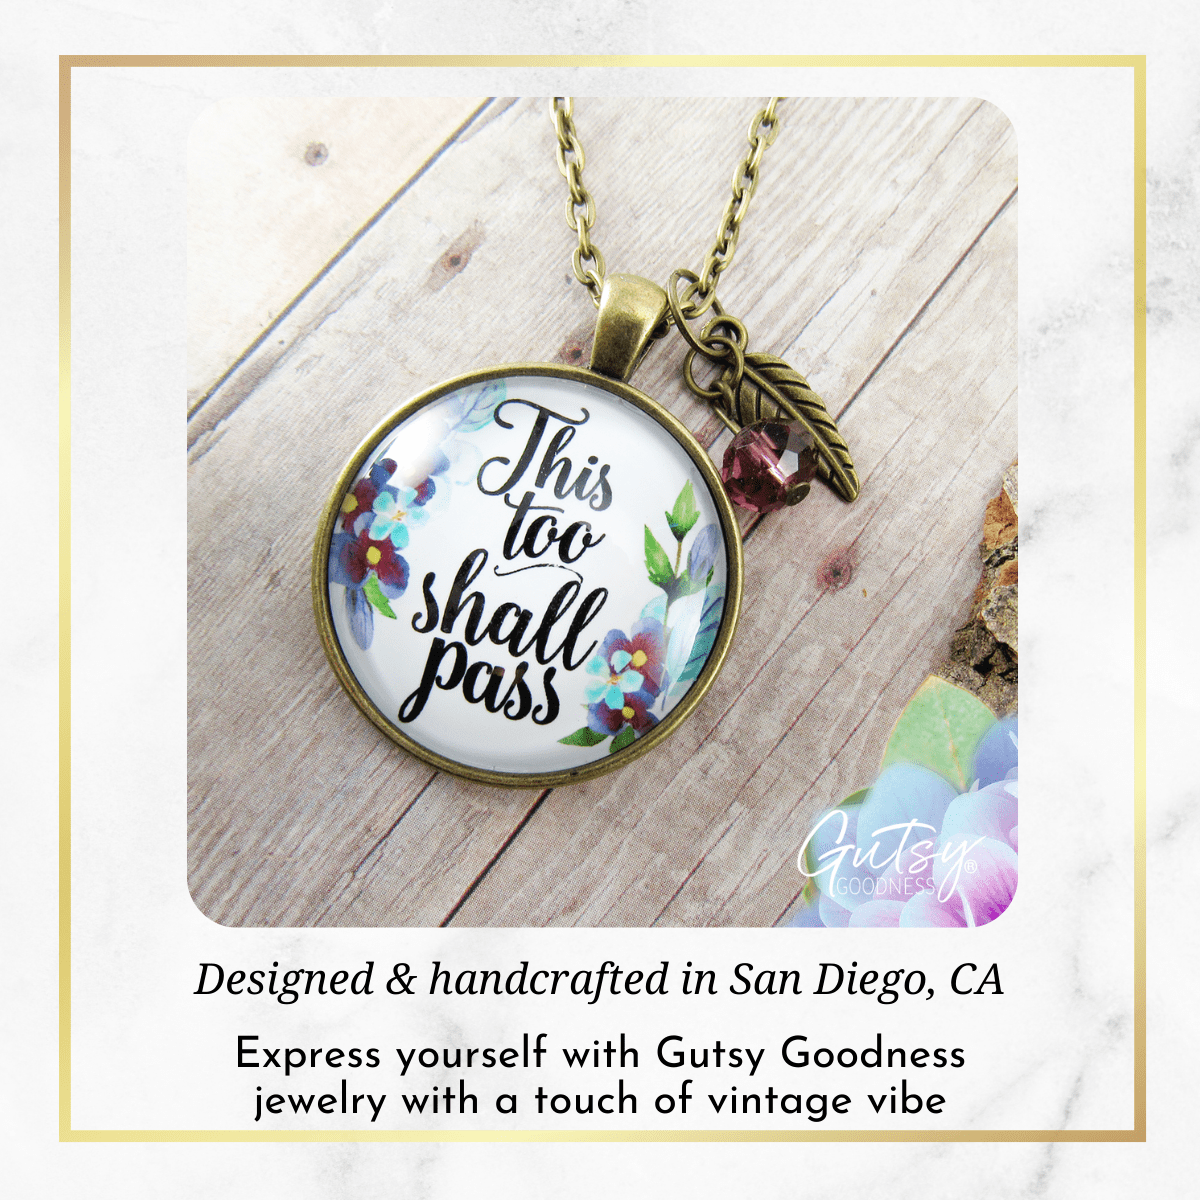 Gutsy Goodness This Too Shall Pass Necklace Inspirational Floral Watercolor Jewelry - Gutsy Goodness Handmade Jewelry;This Too Shall Pass Necklace Inspirational Floral Watercolor Jewelry - Gutsy Goodness Handmade Jewelry Gifts